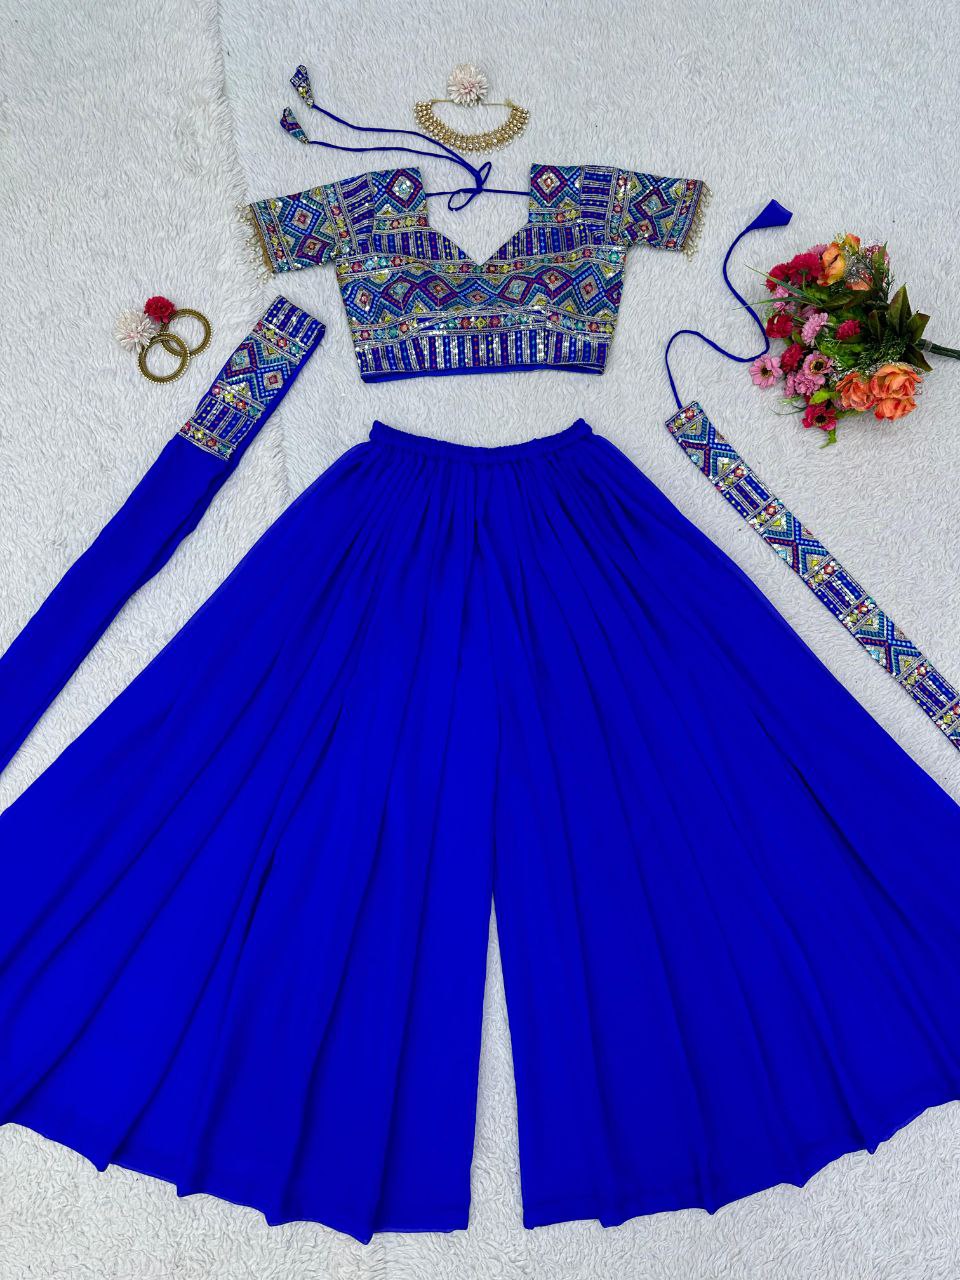 Exclusive For Wedding Season Blue Choli Plazzo With 3MM Sequnce Work On Faux Georgette Fabric